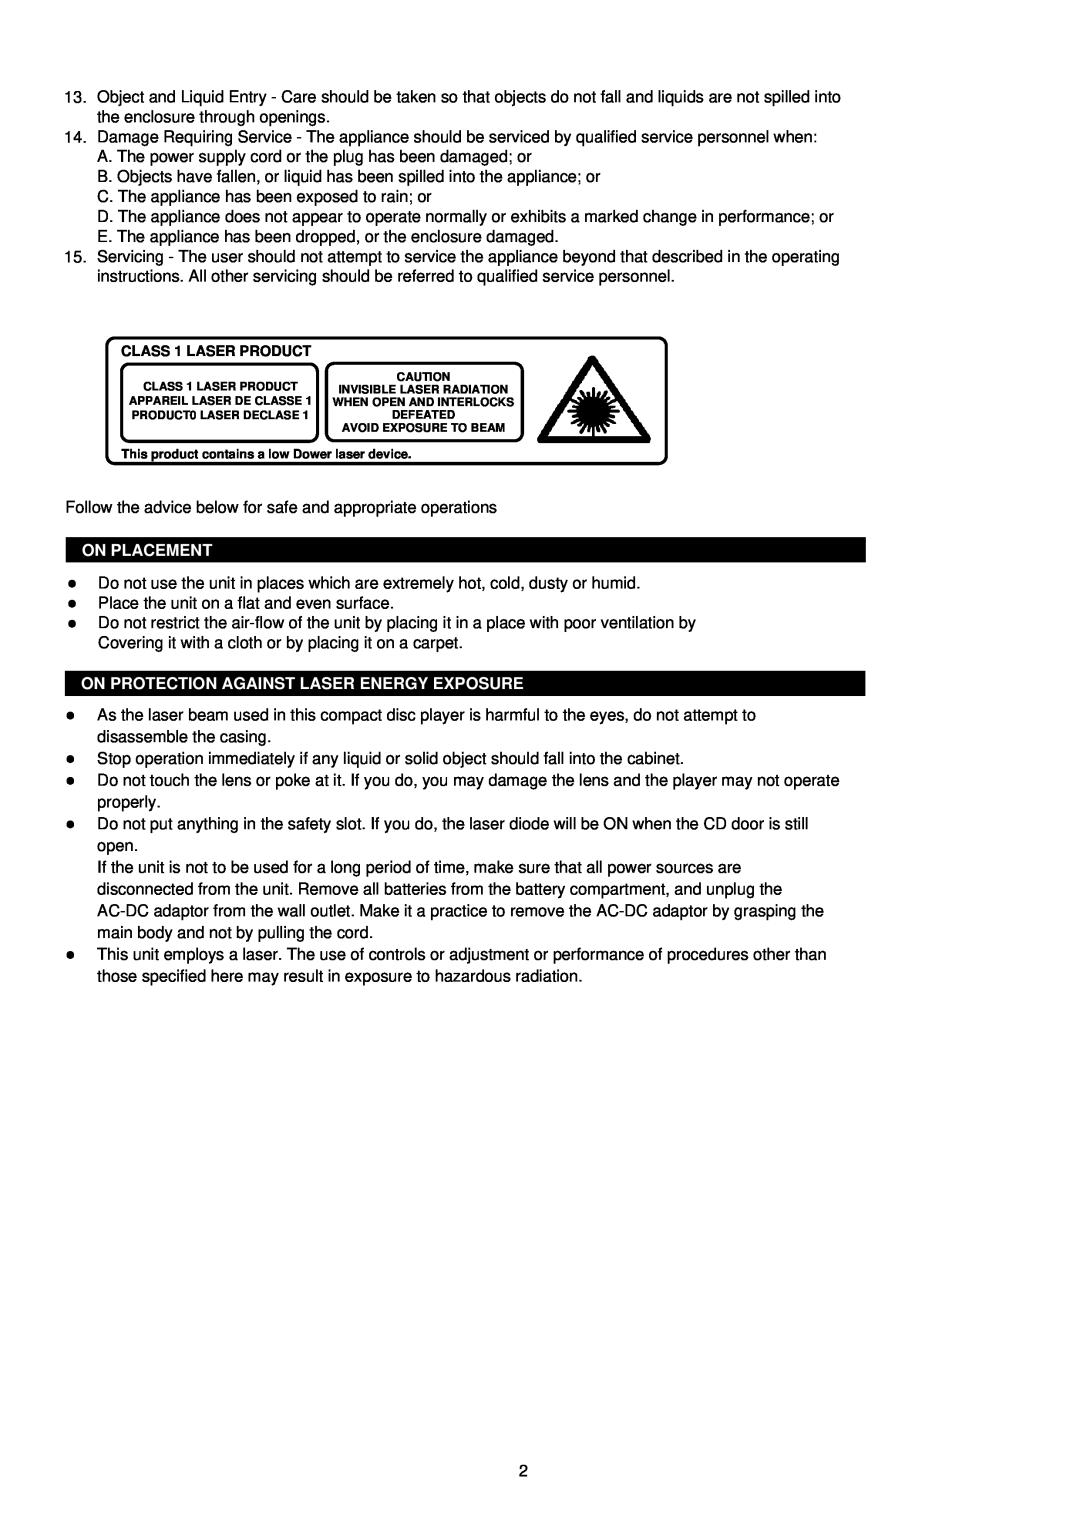 Palsonic PRC-241 instruction manual On Placement, On Protection Against Laser Energy Exposure 